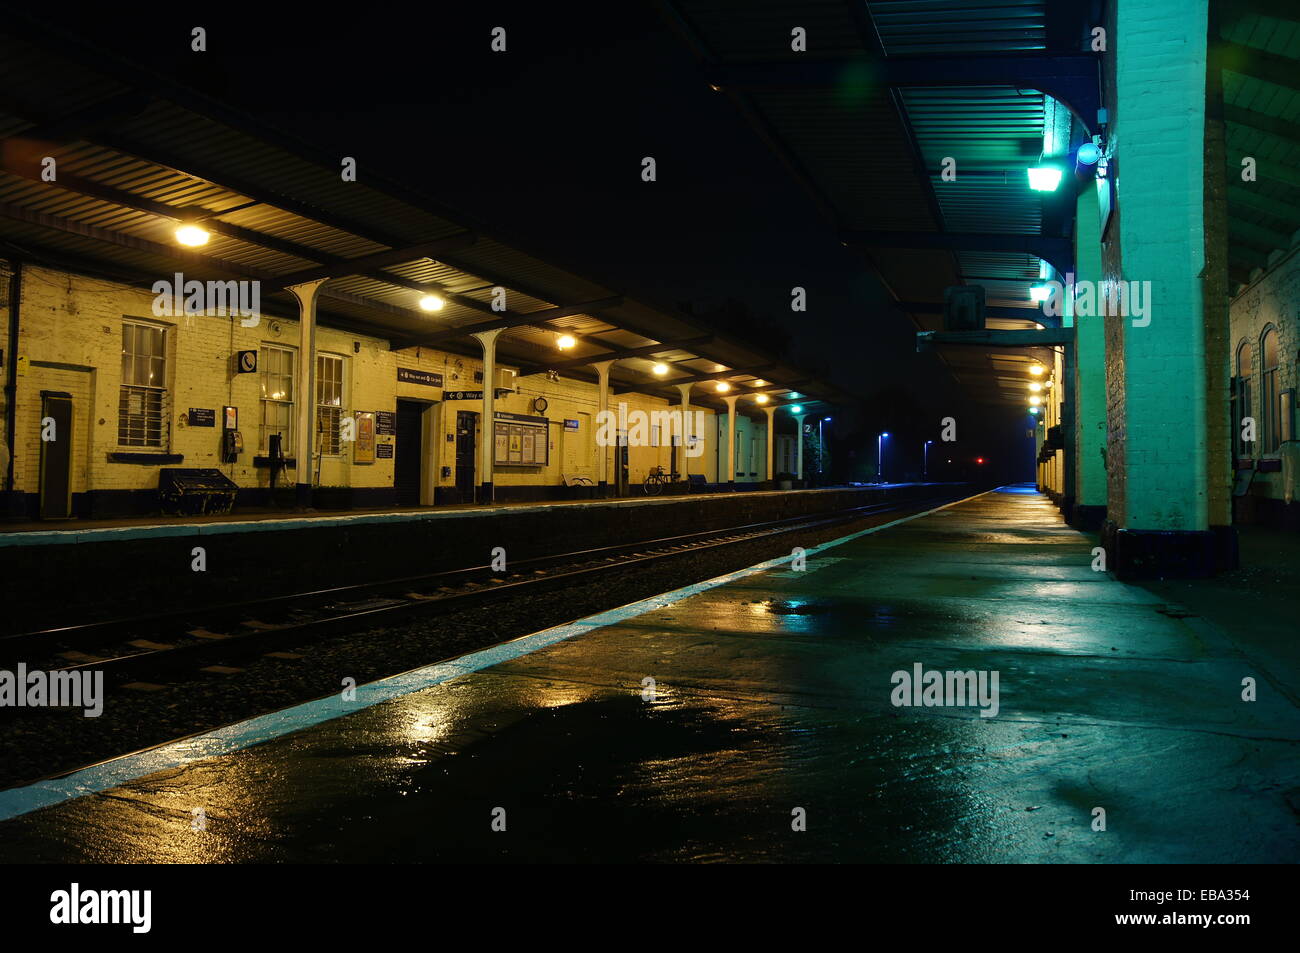 Deserted small town train station at night Stock Photo